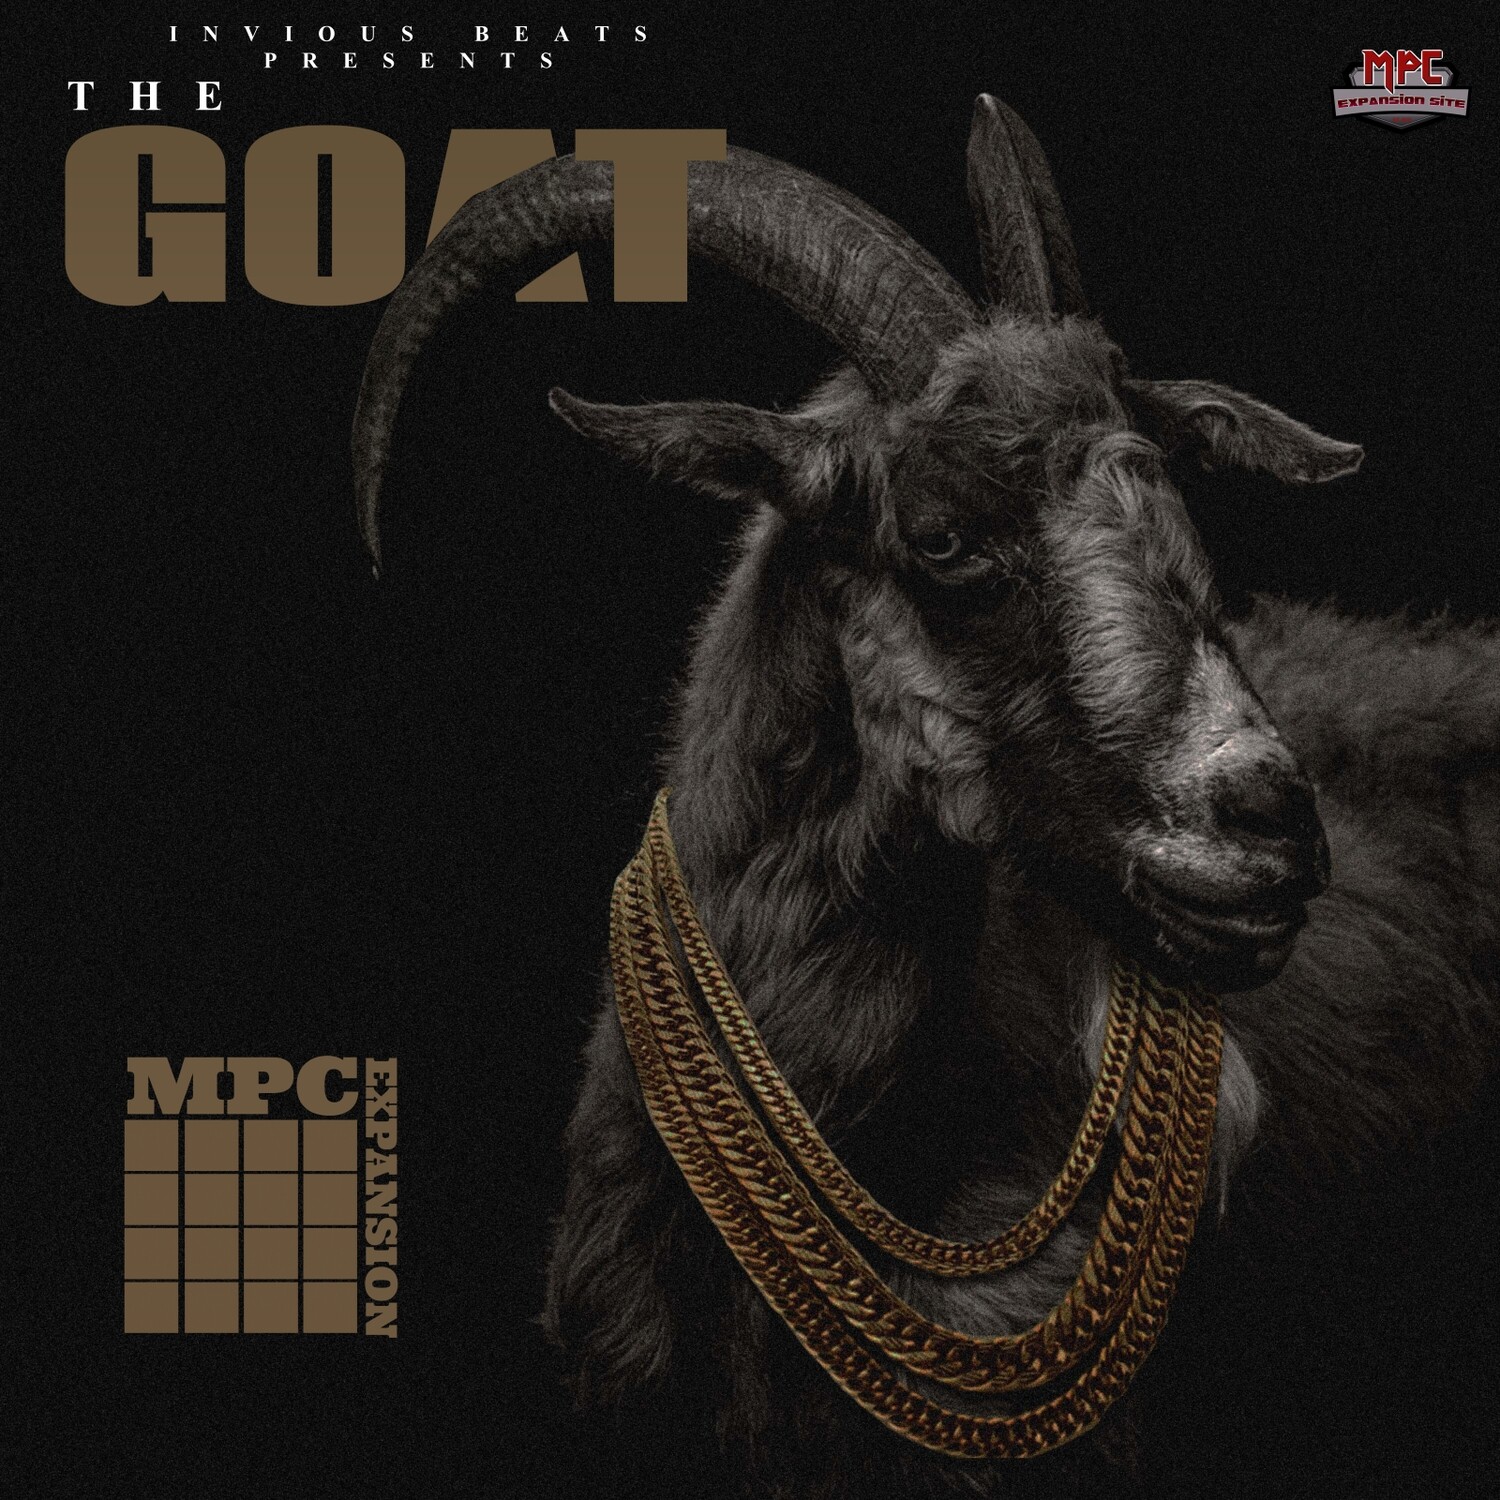 MPC EXPANSION 'THE GOAT' by INVIOUS